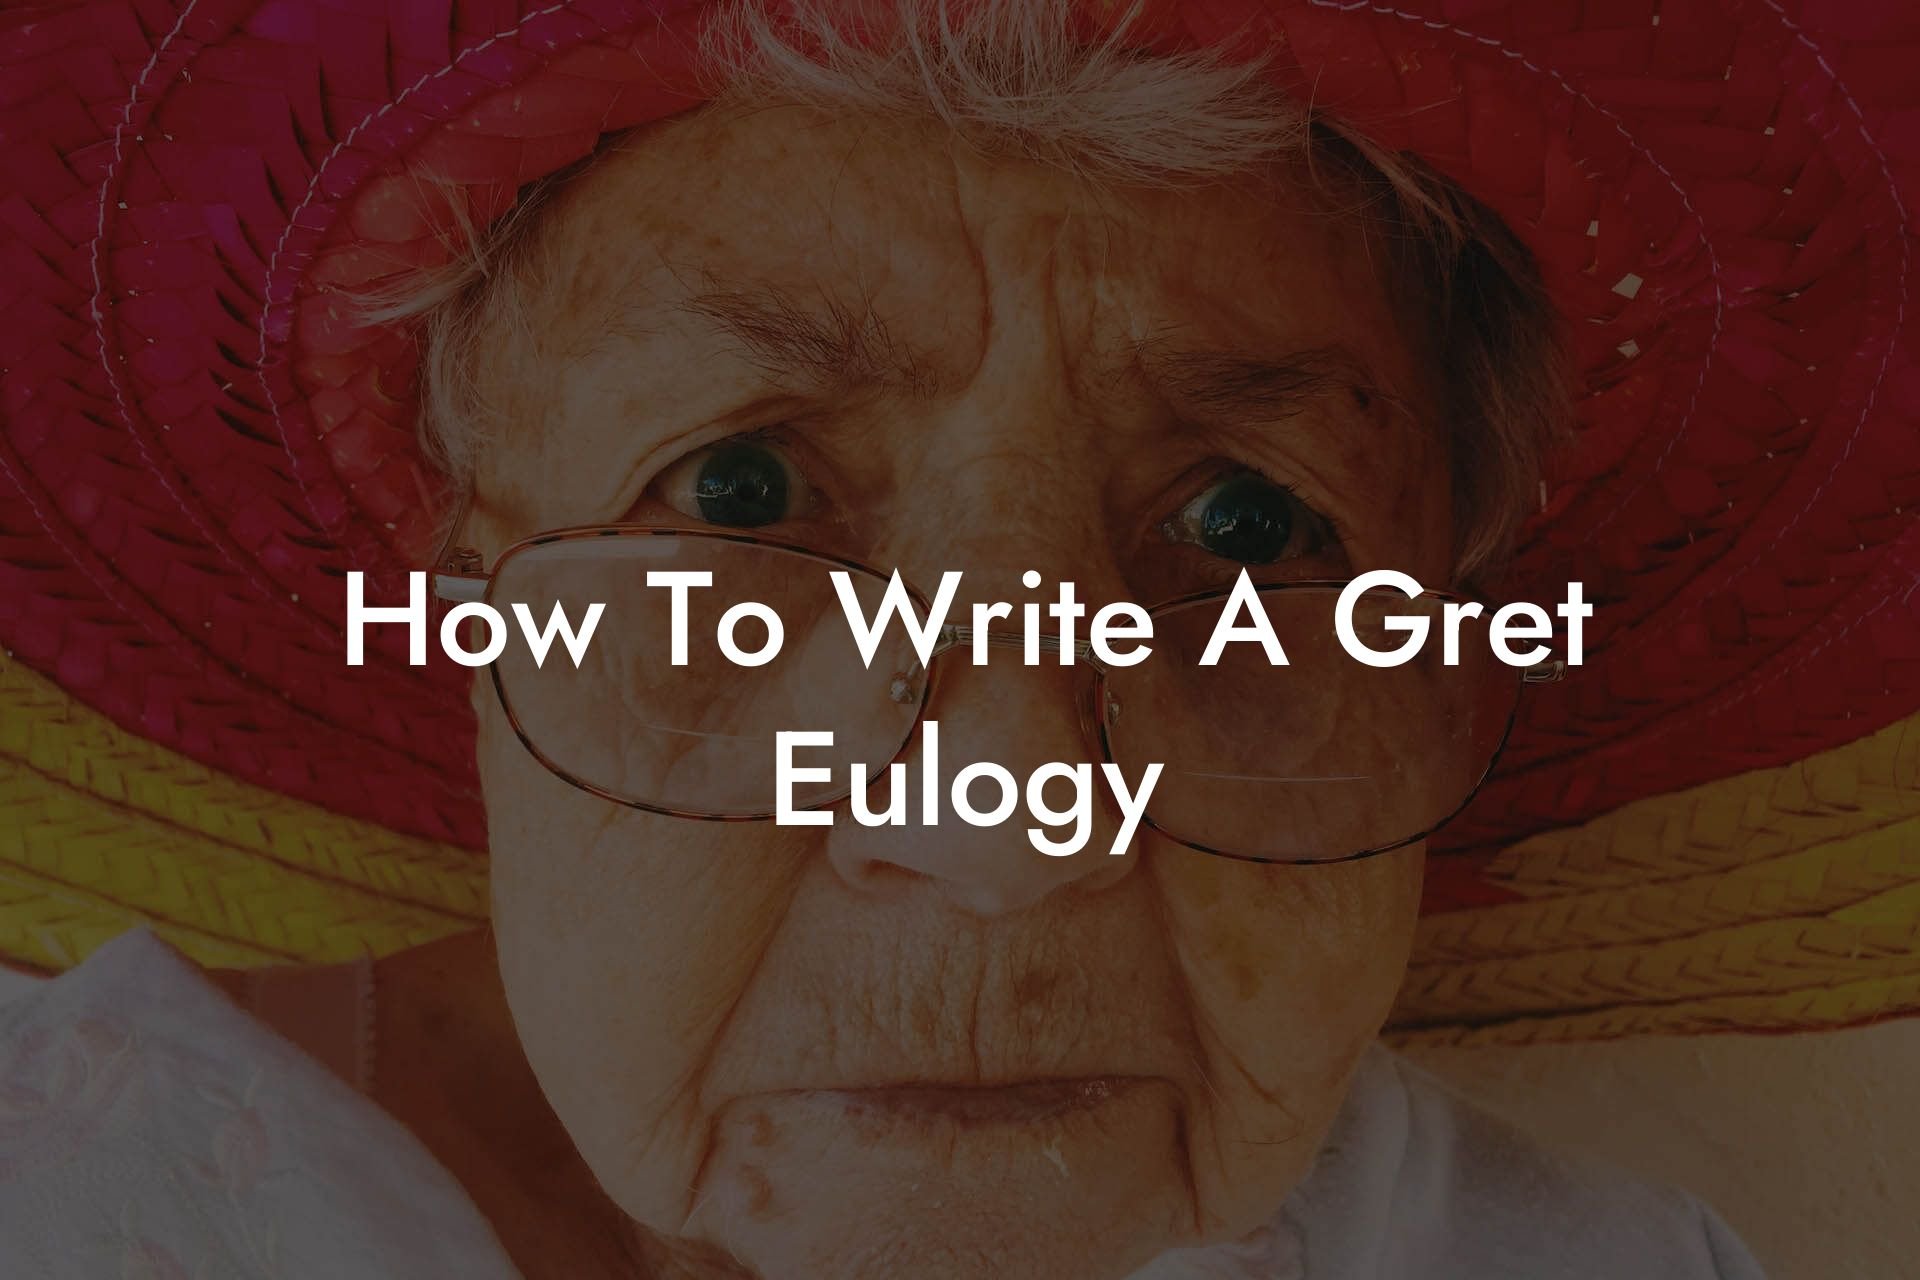 How To Write A Gret Eulogy